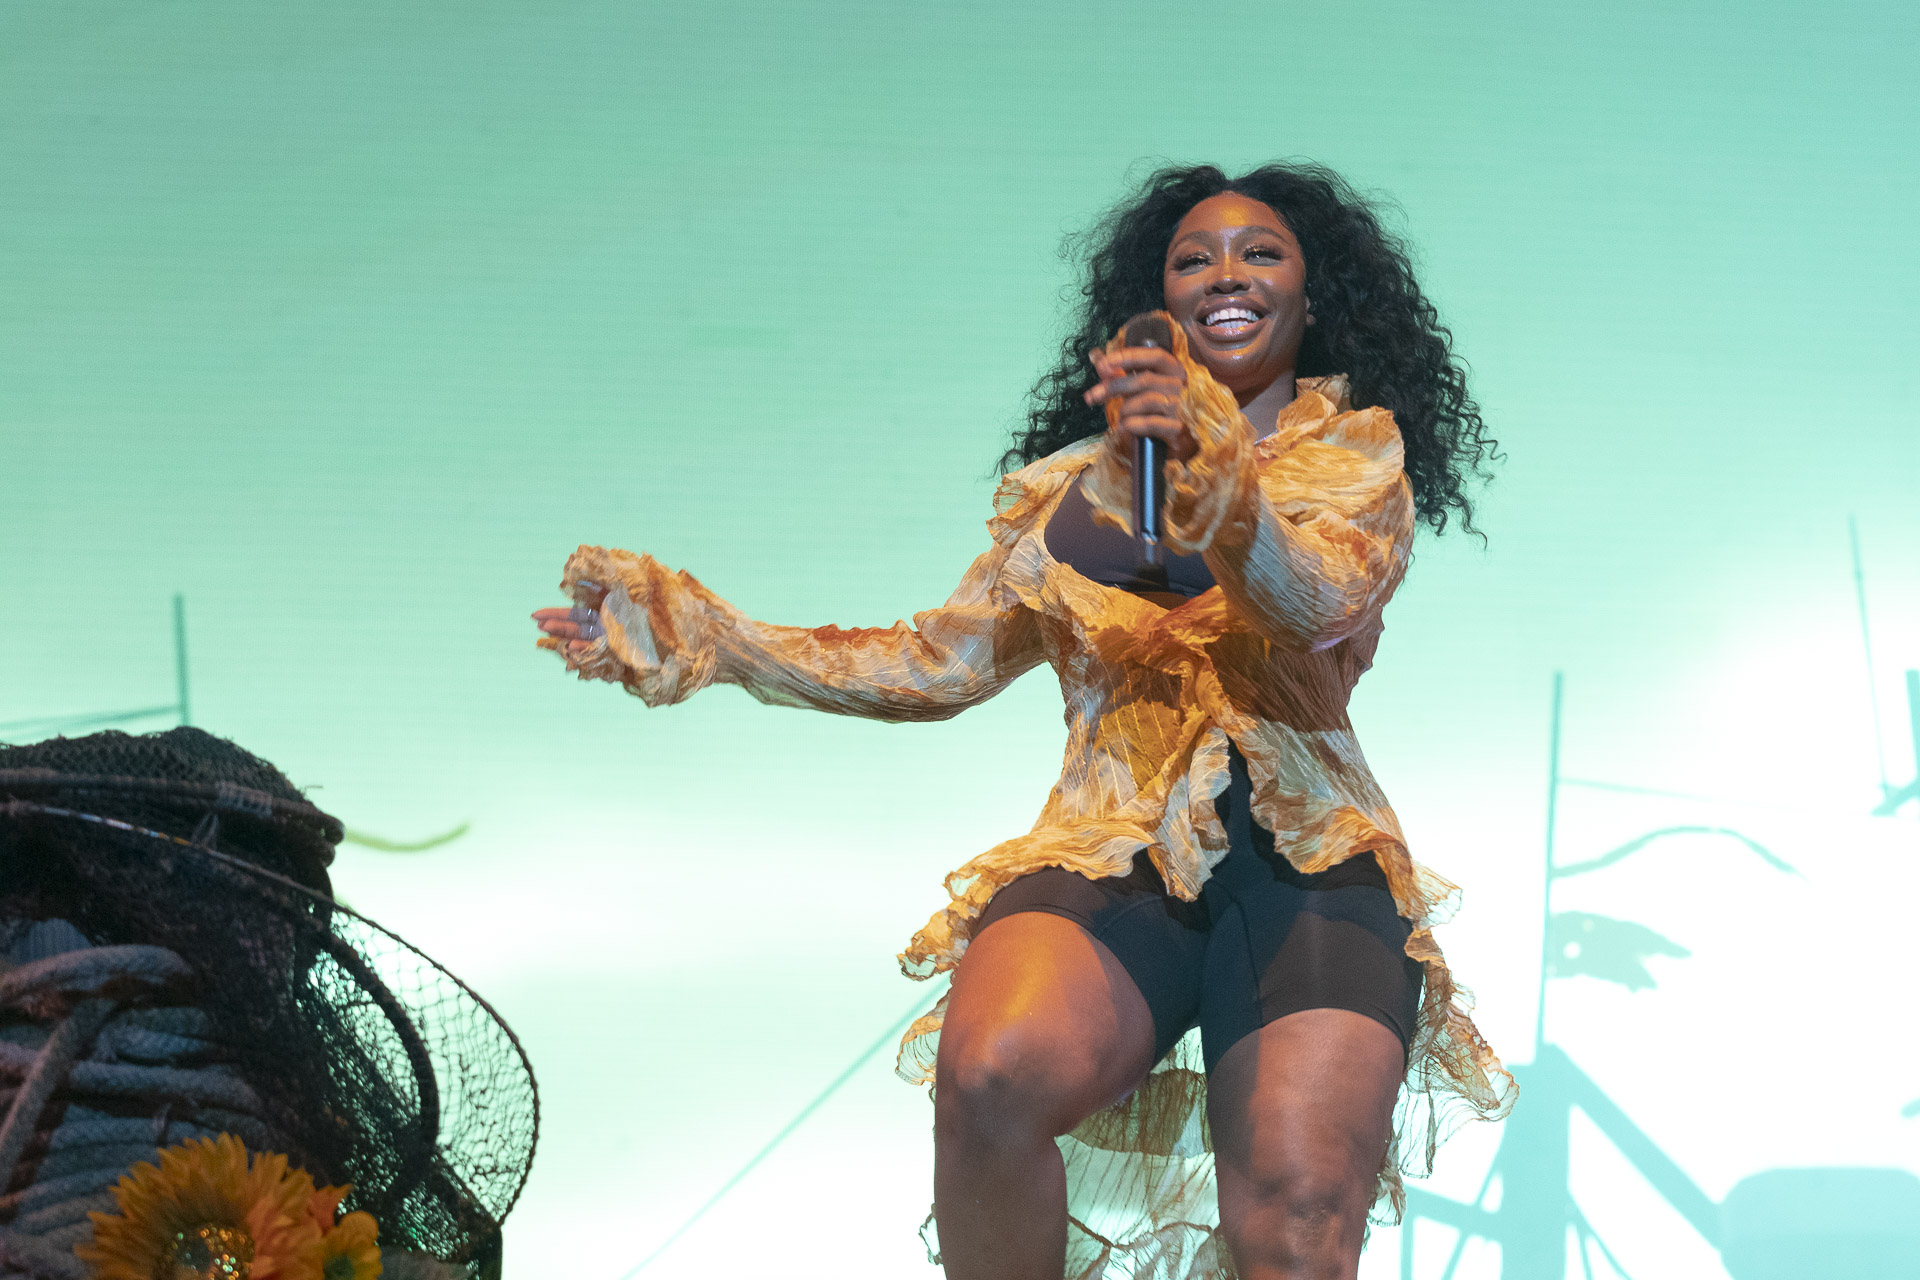 A Black woman stands behind a microphone stand on stage. She is dancing and smiling.